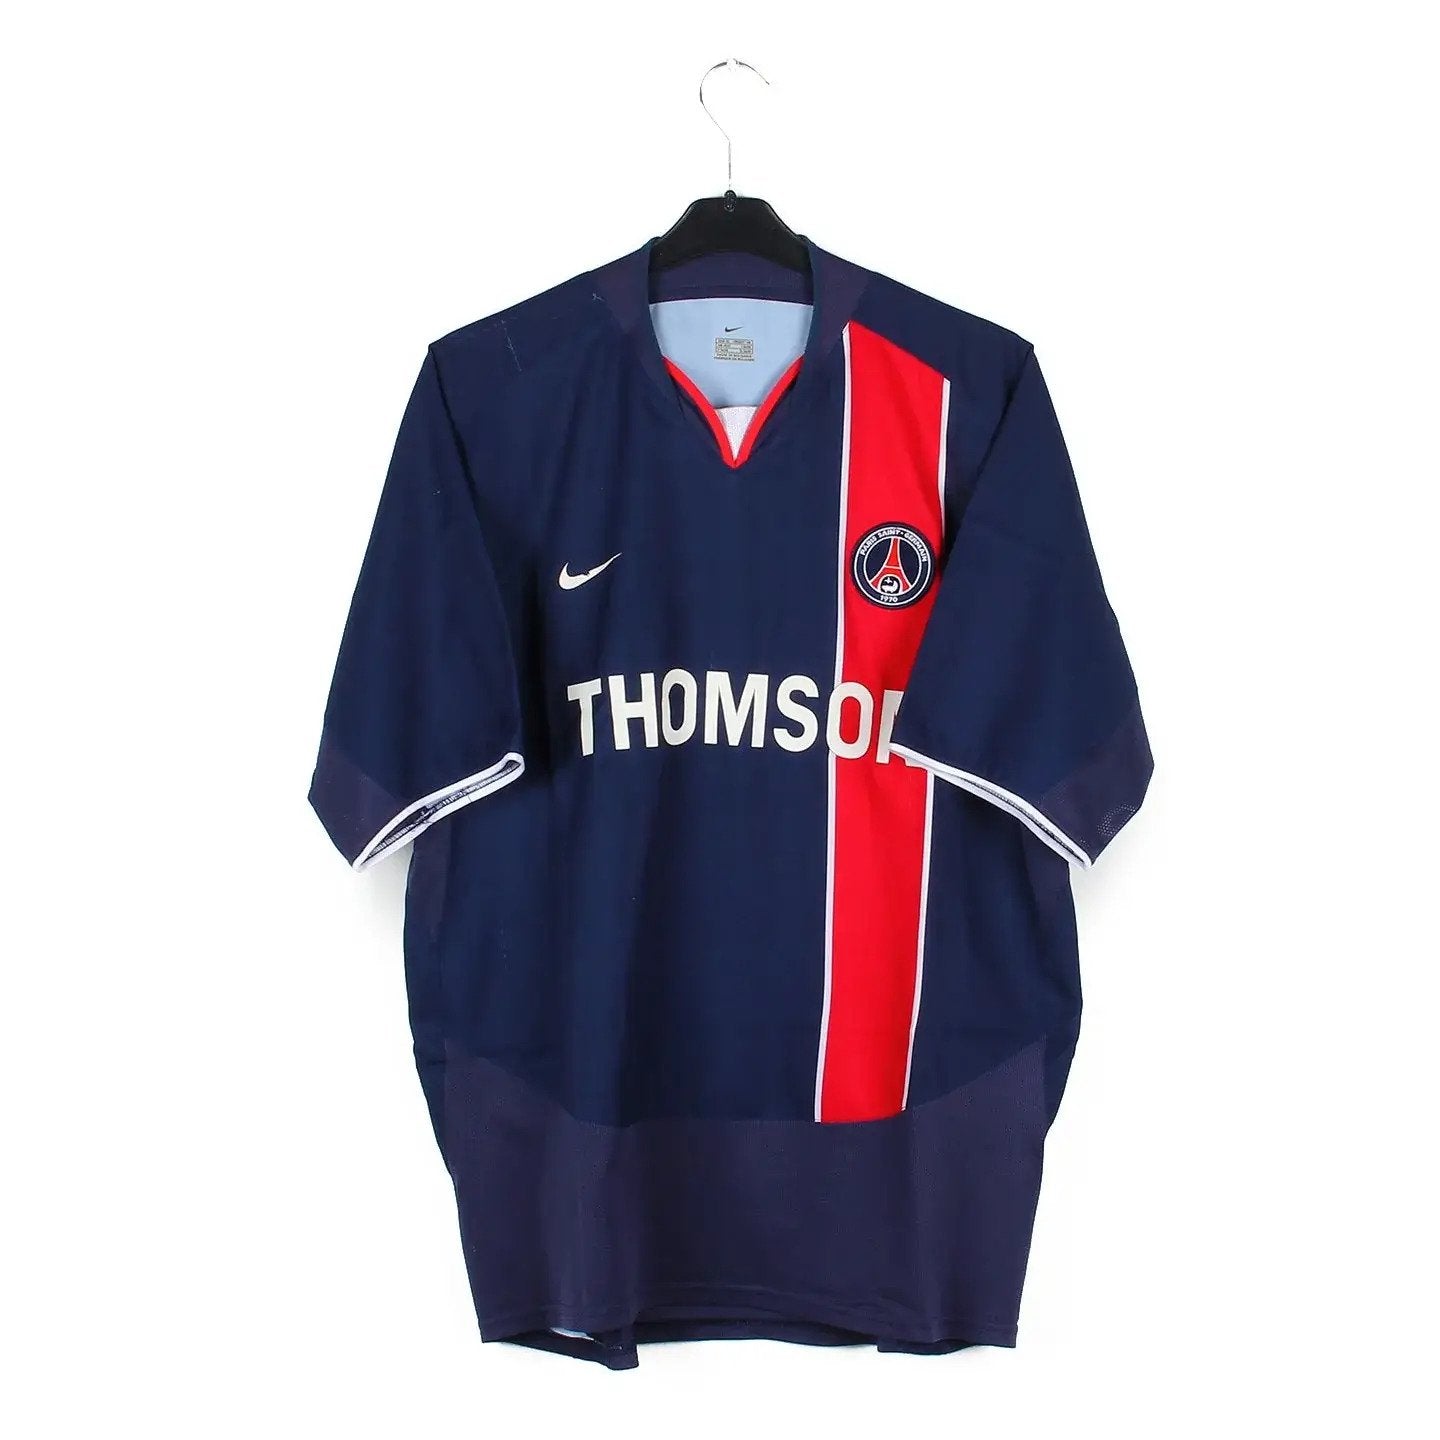 Classic Football Shirts on X: PSG vs Real Madrid Two clubs who have had  fashion inspired shirt designs in the past. In 2006, PSG had this Louis  Vuitton style away shirt while